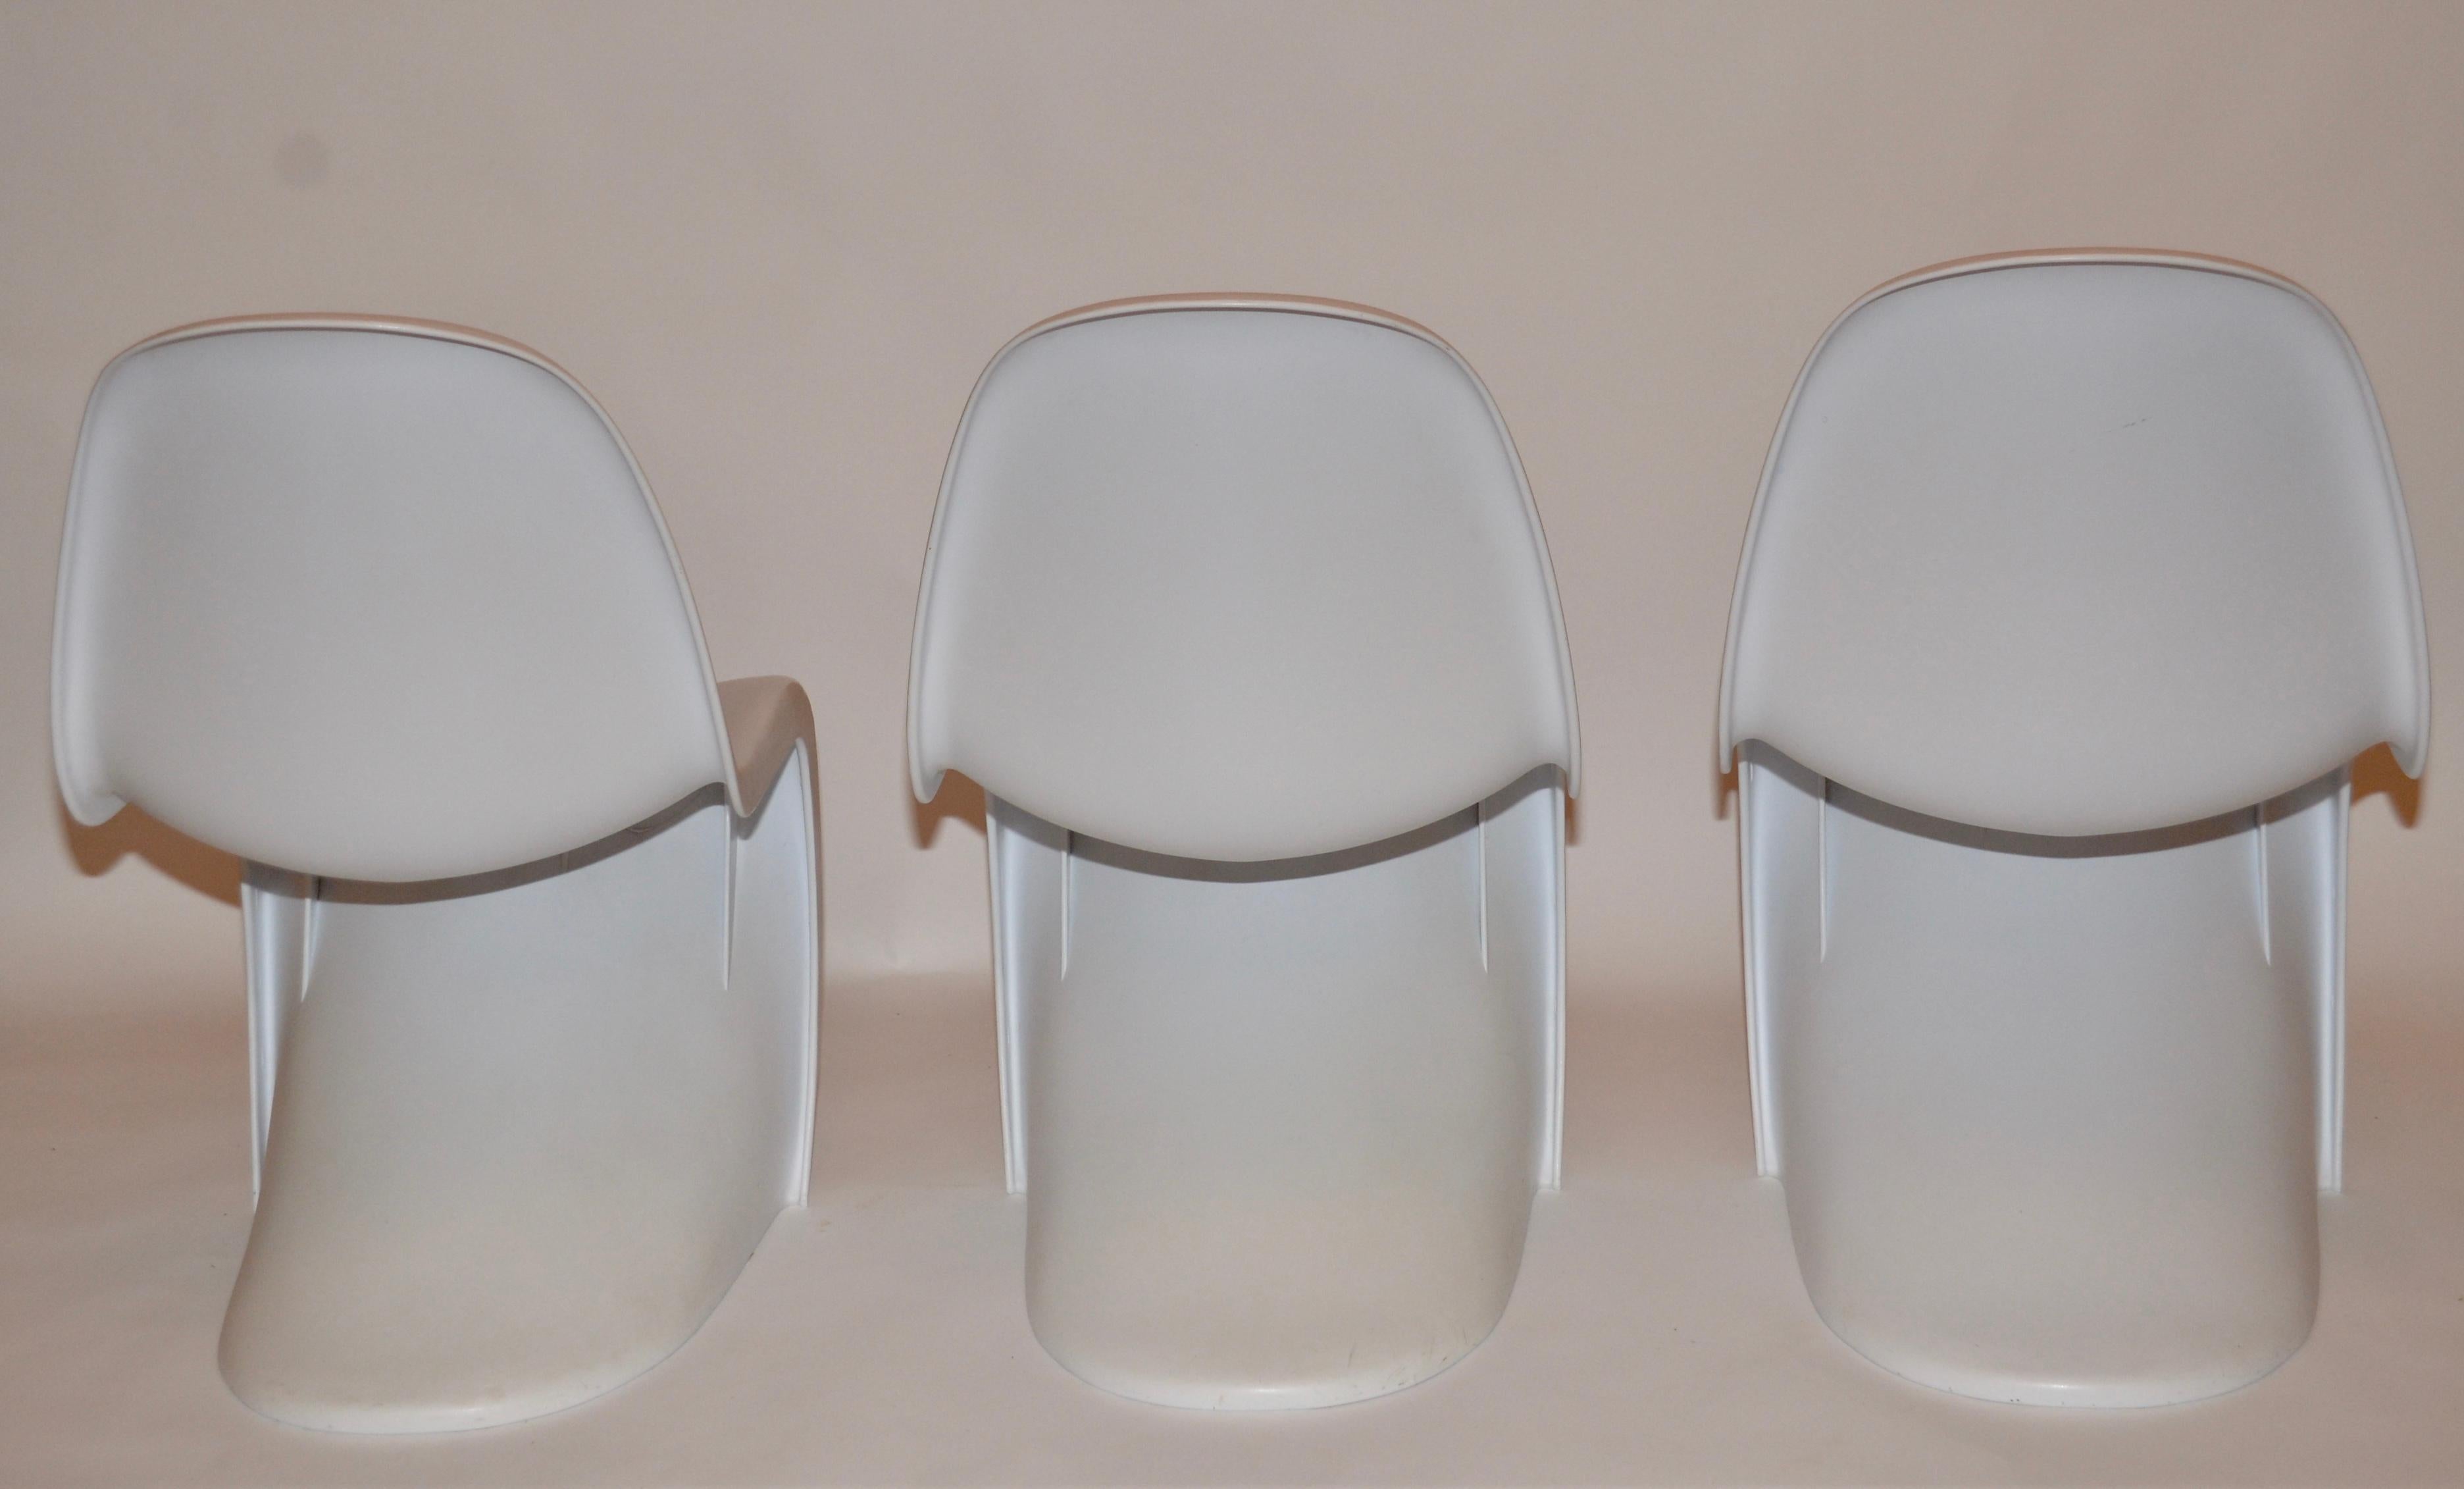 Molded Set of Six Chairs in the Style of the Verner Panton S Chair